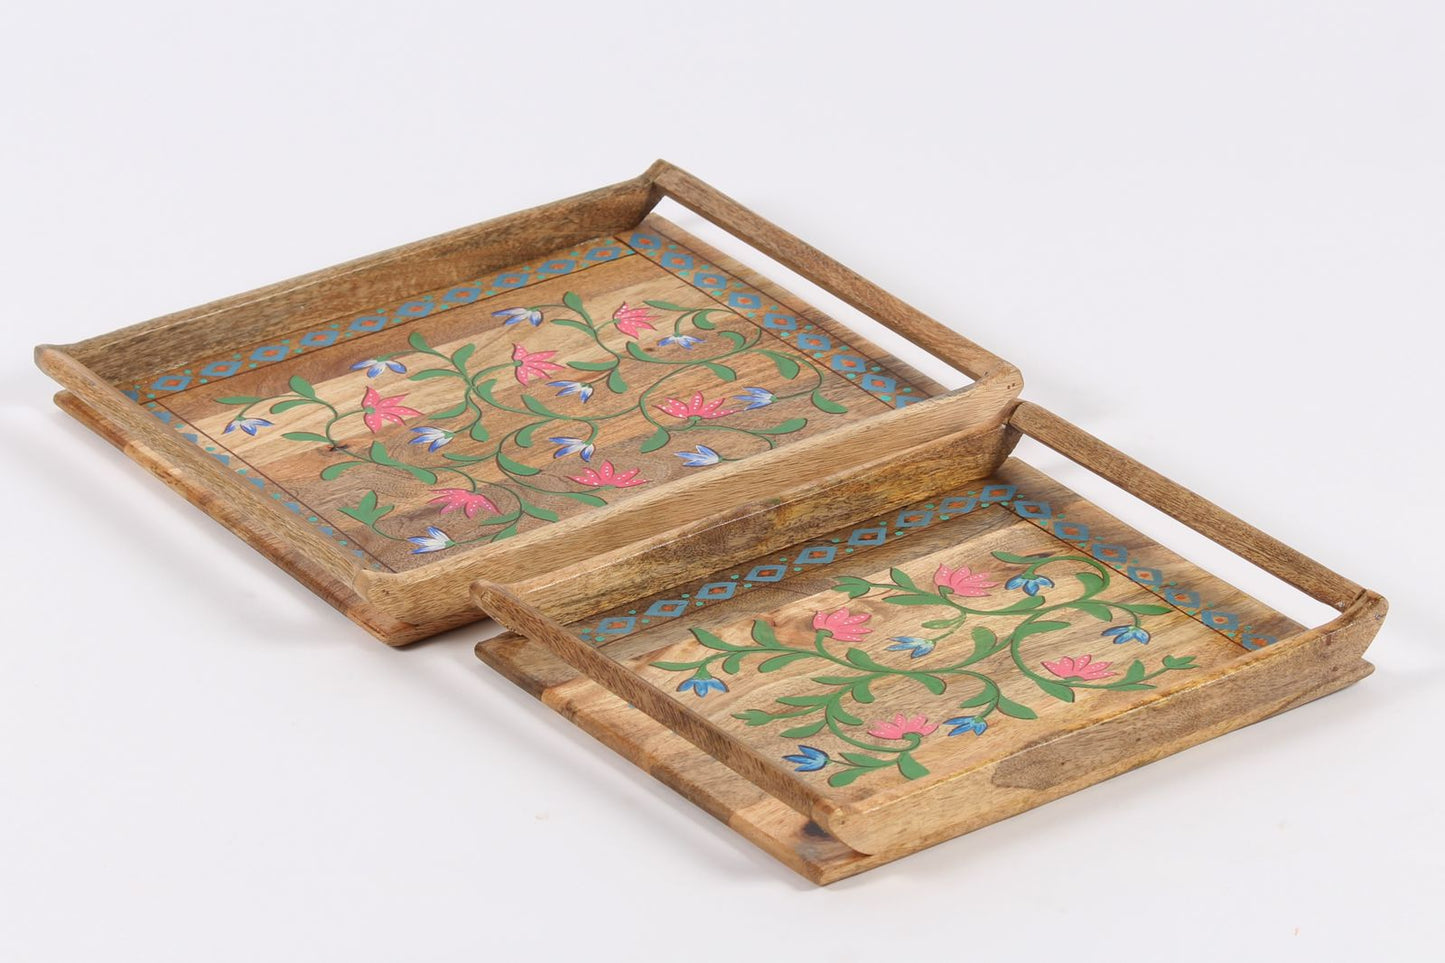 Gulbagh Serving Trays  Wood (set of 2)